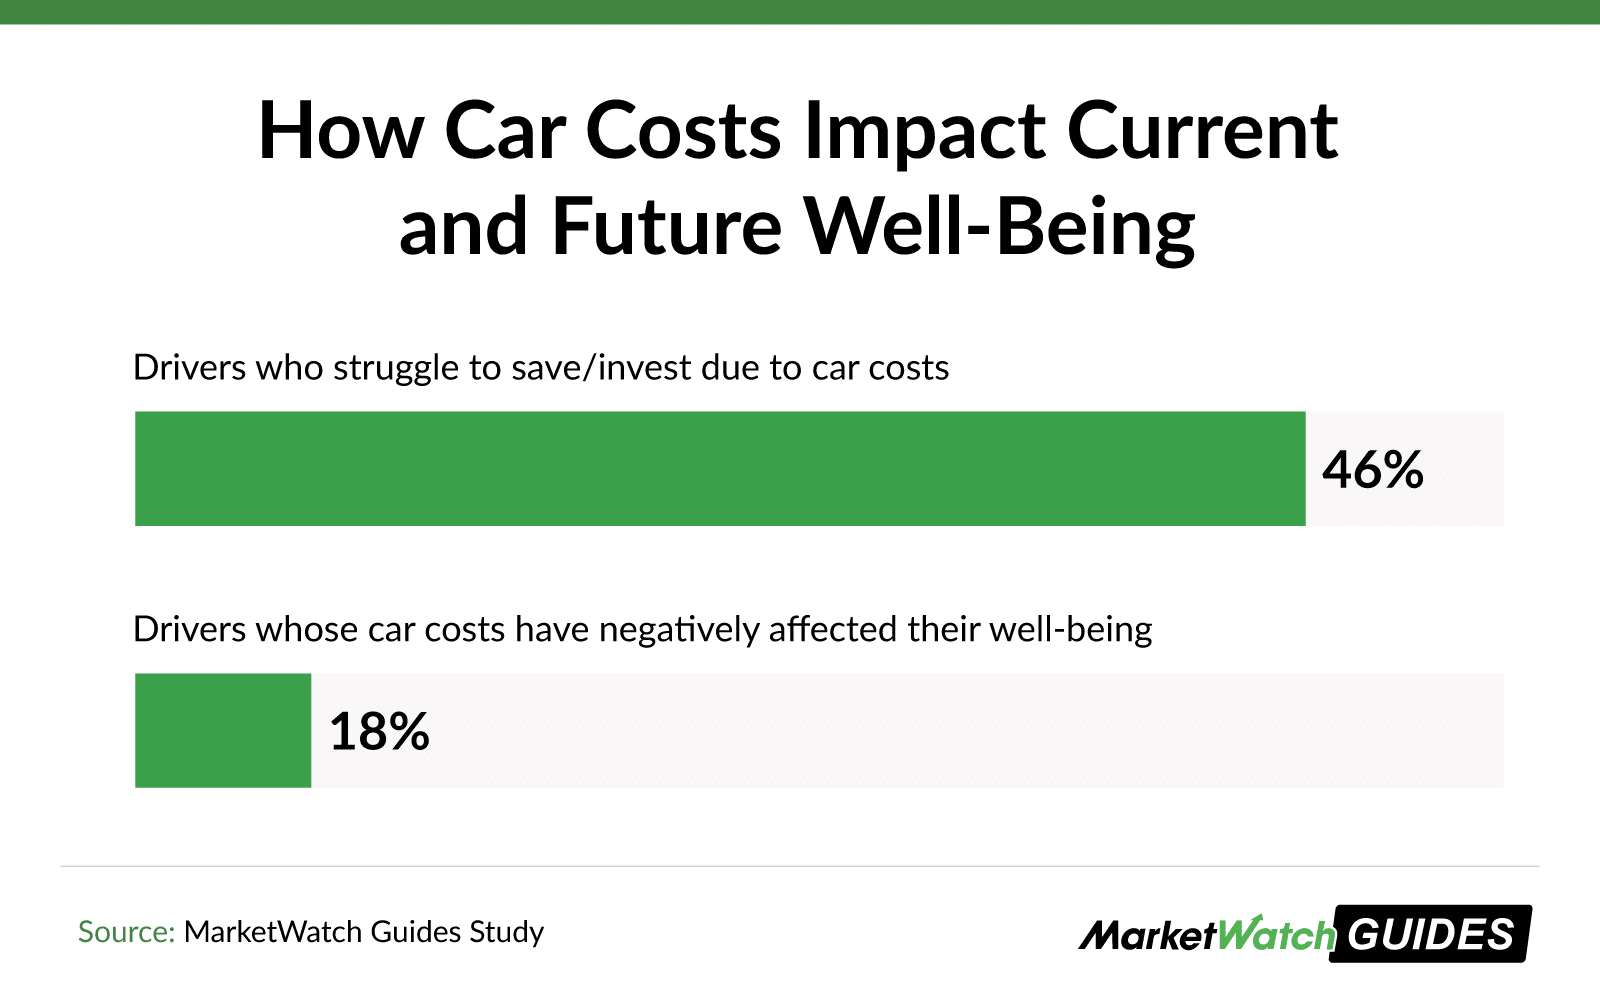 Bar graph showing 18% of drivers report that car costs negatively affect their well-being.